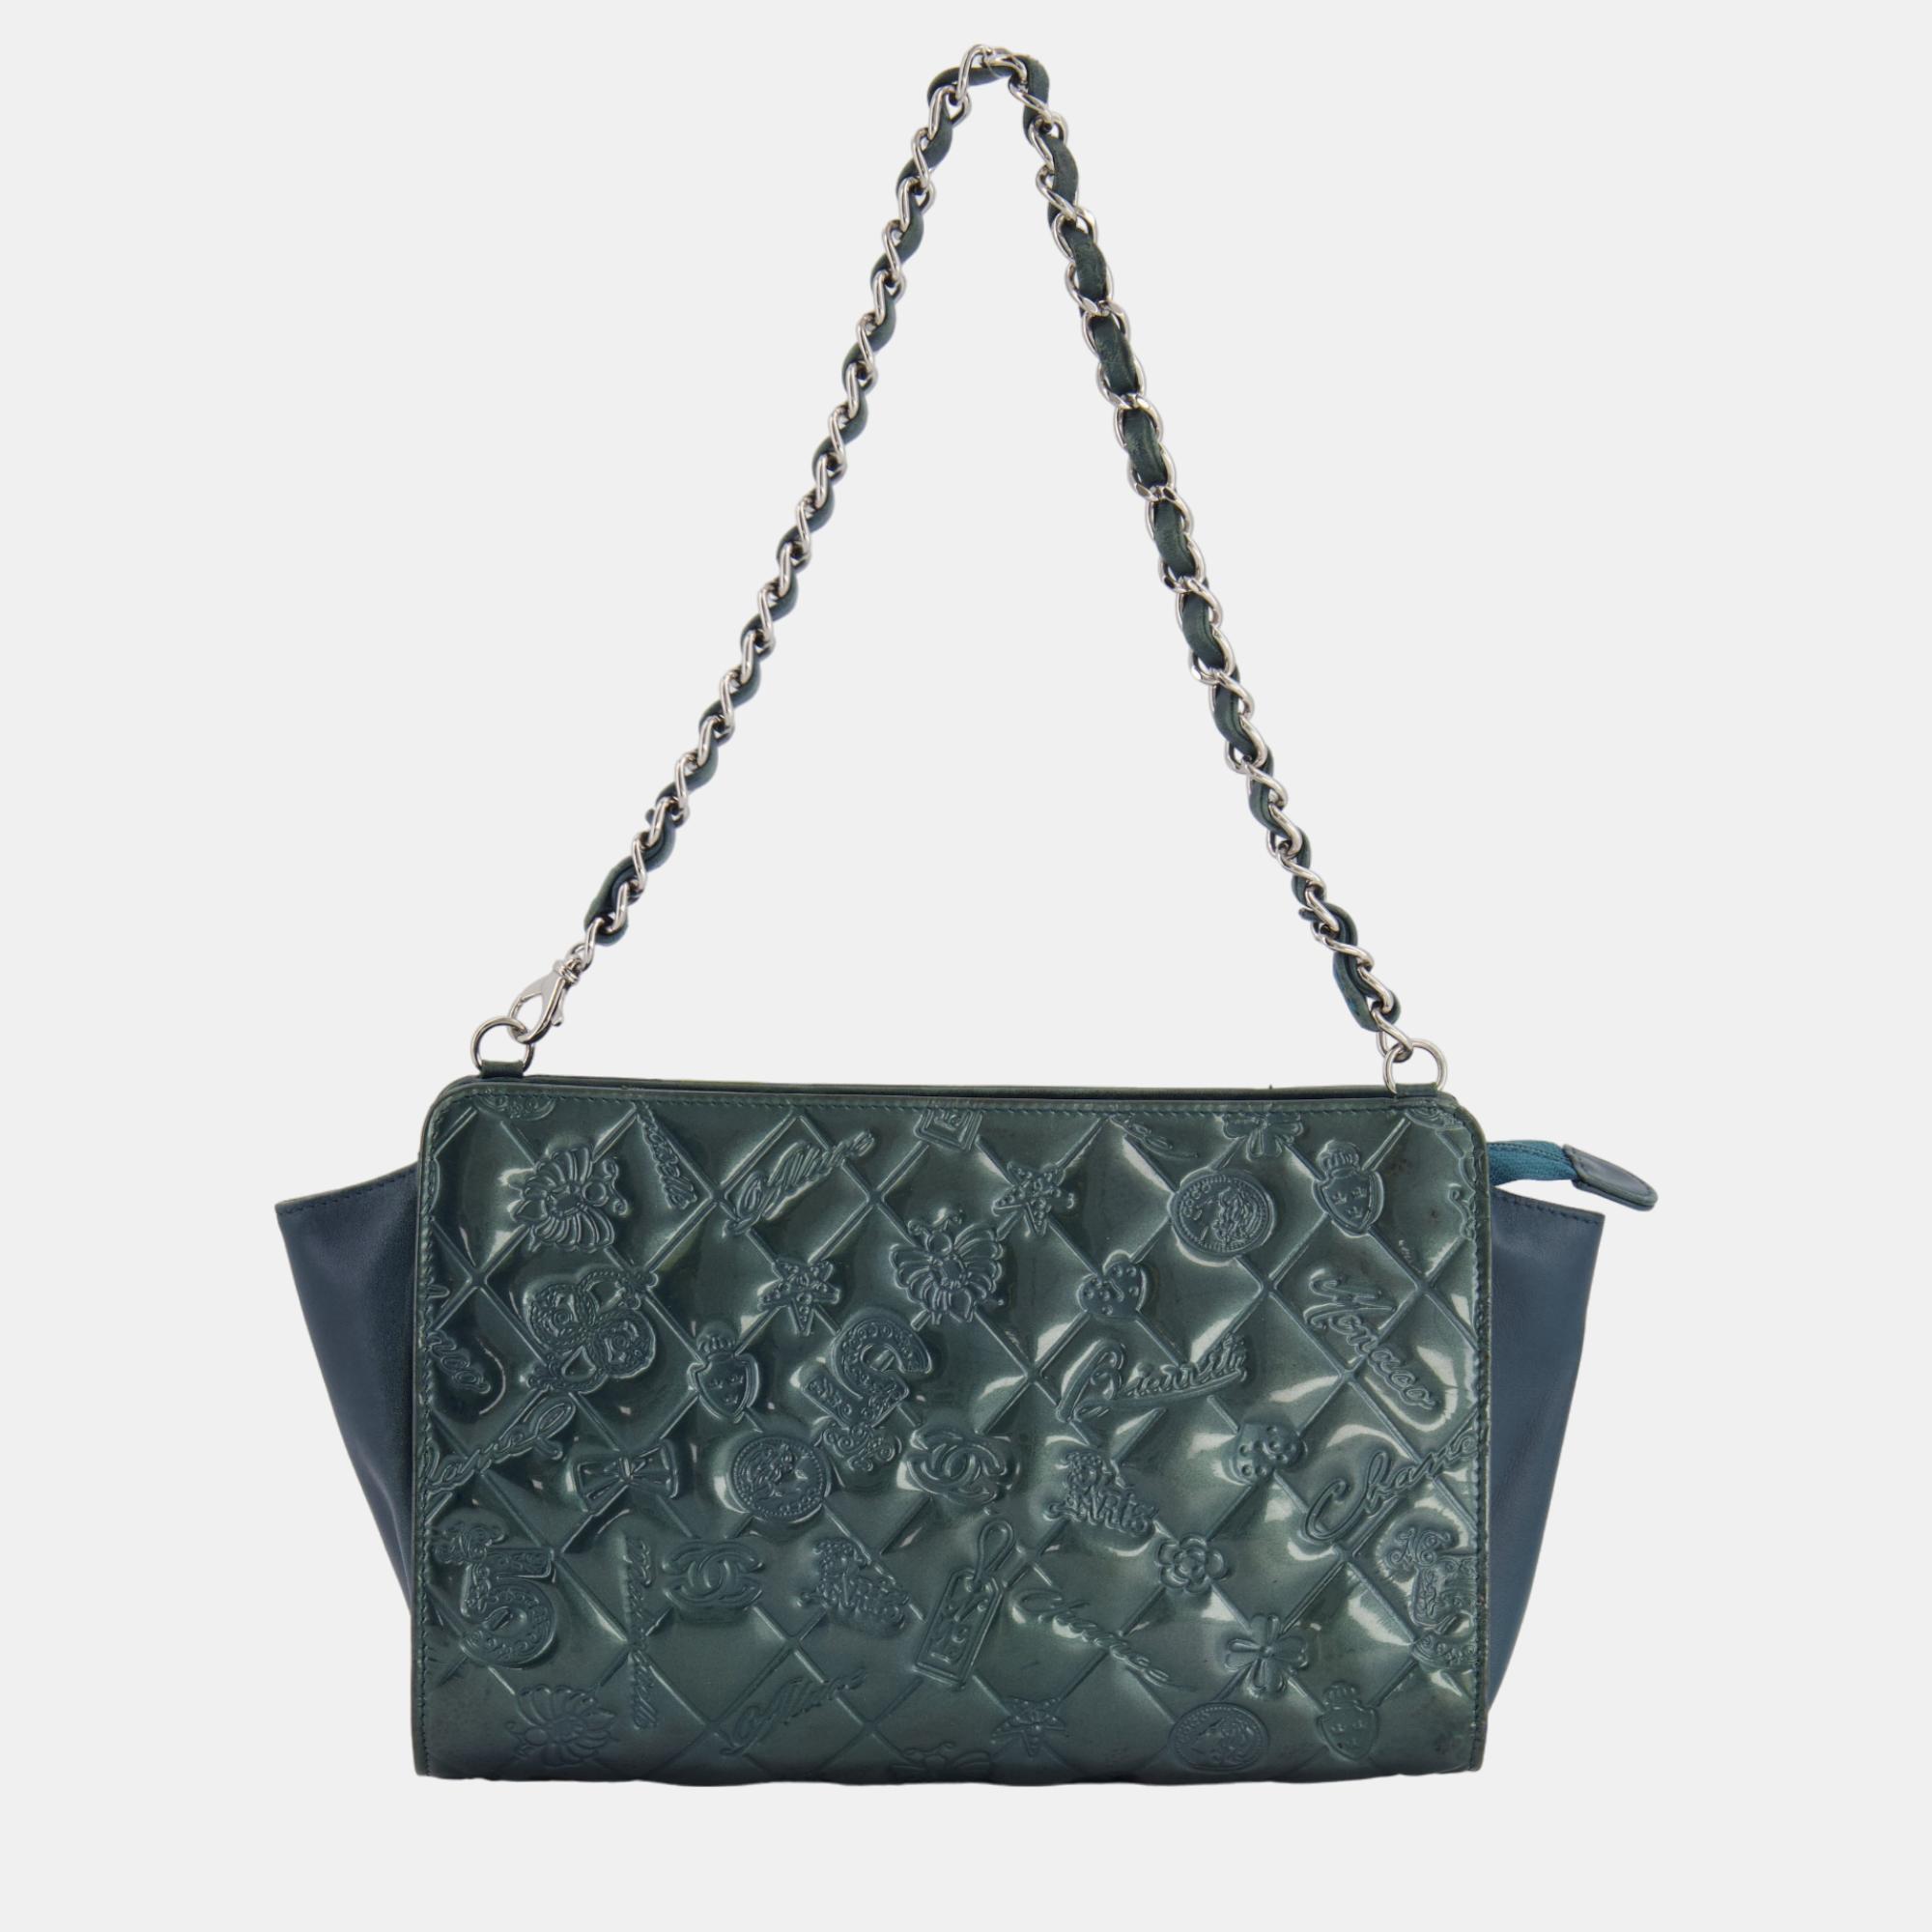 Chanel Teal Blue Metallic Patent Leather Small Mademoiselle Bag With Silver Hardware